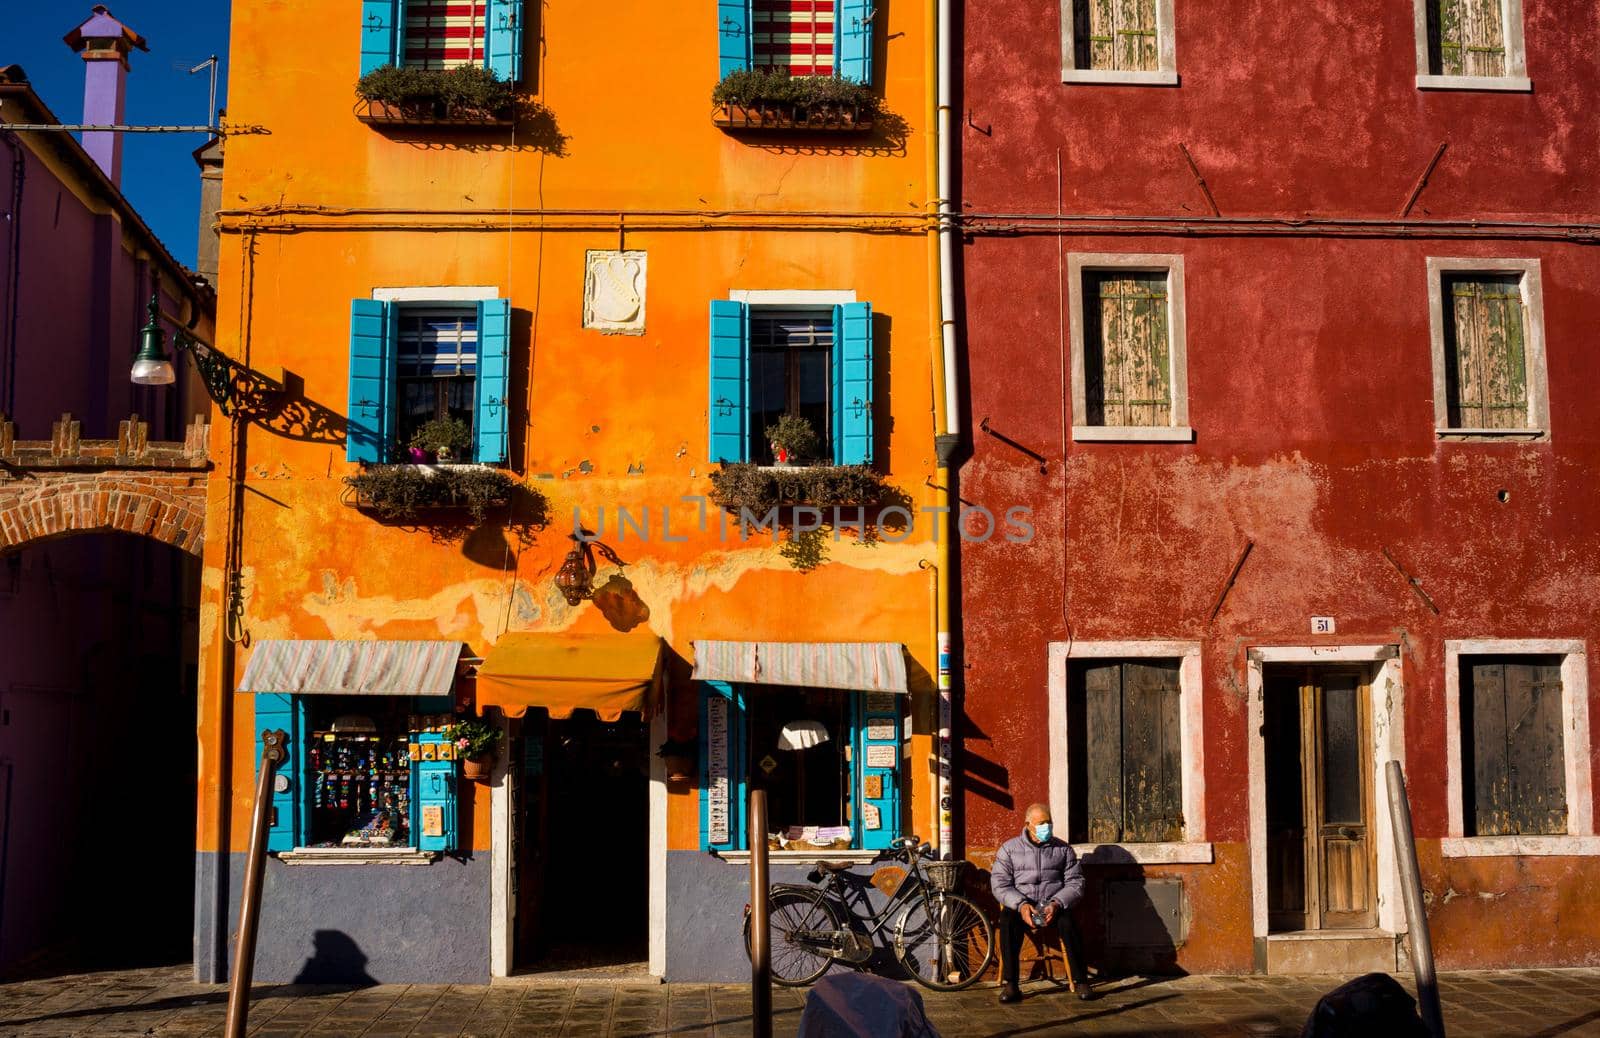 Italian elderly man sitting outside his house next his bicycle, behind the colorful houses of Burano island by bepsimage